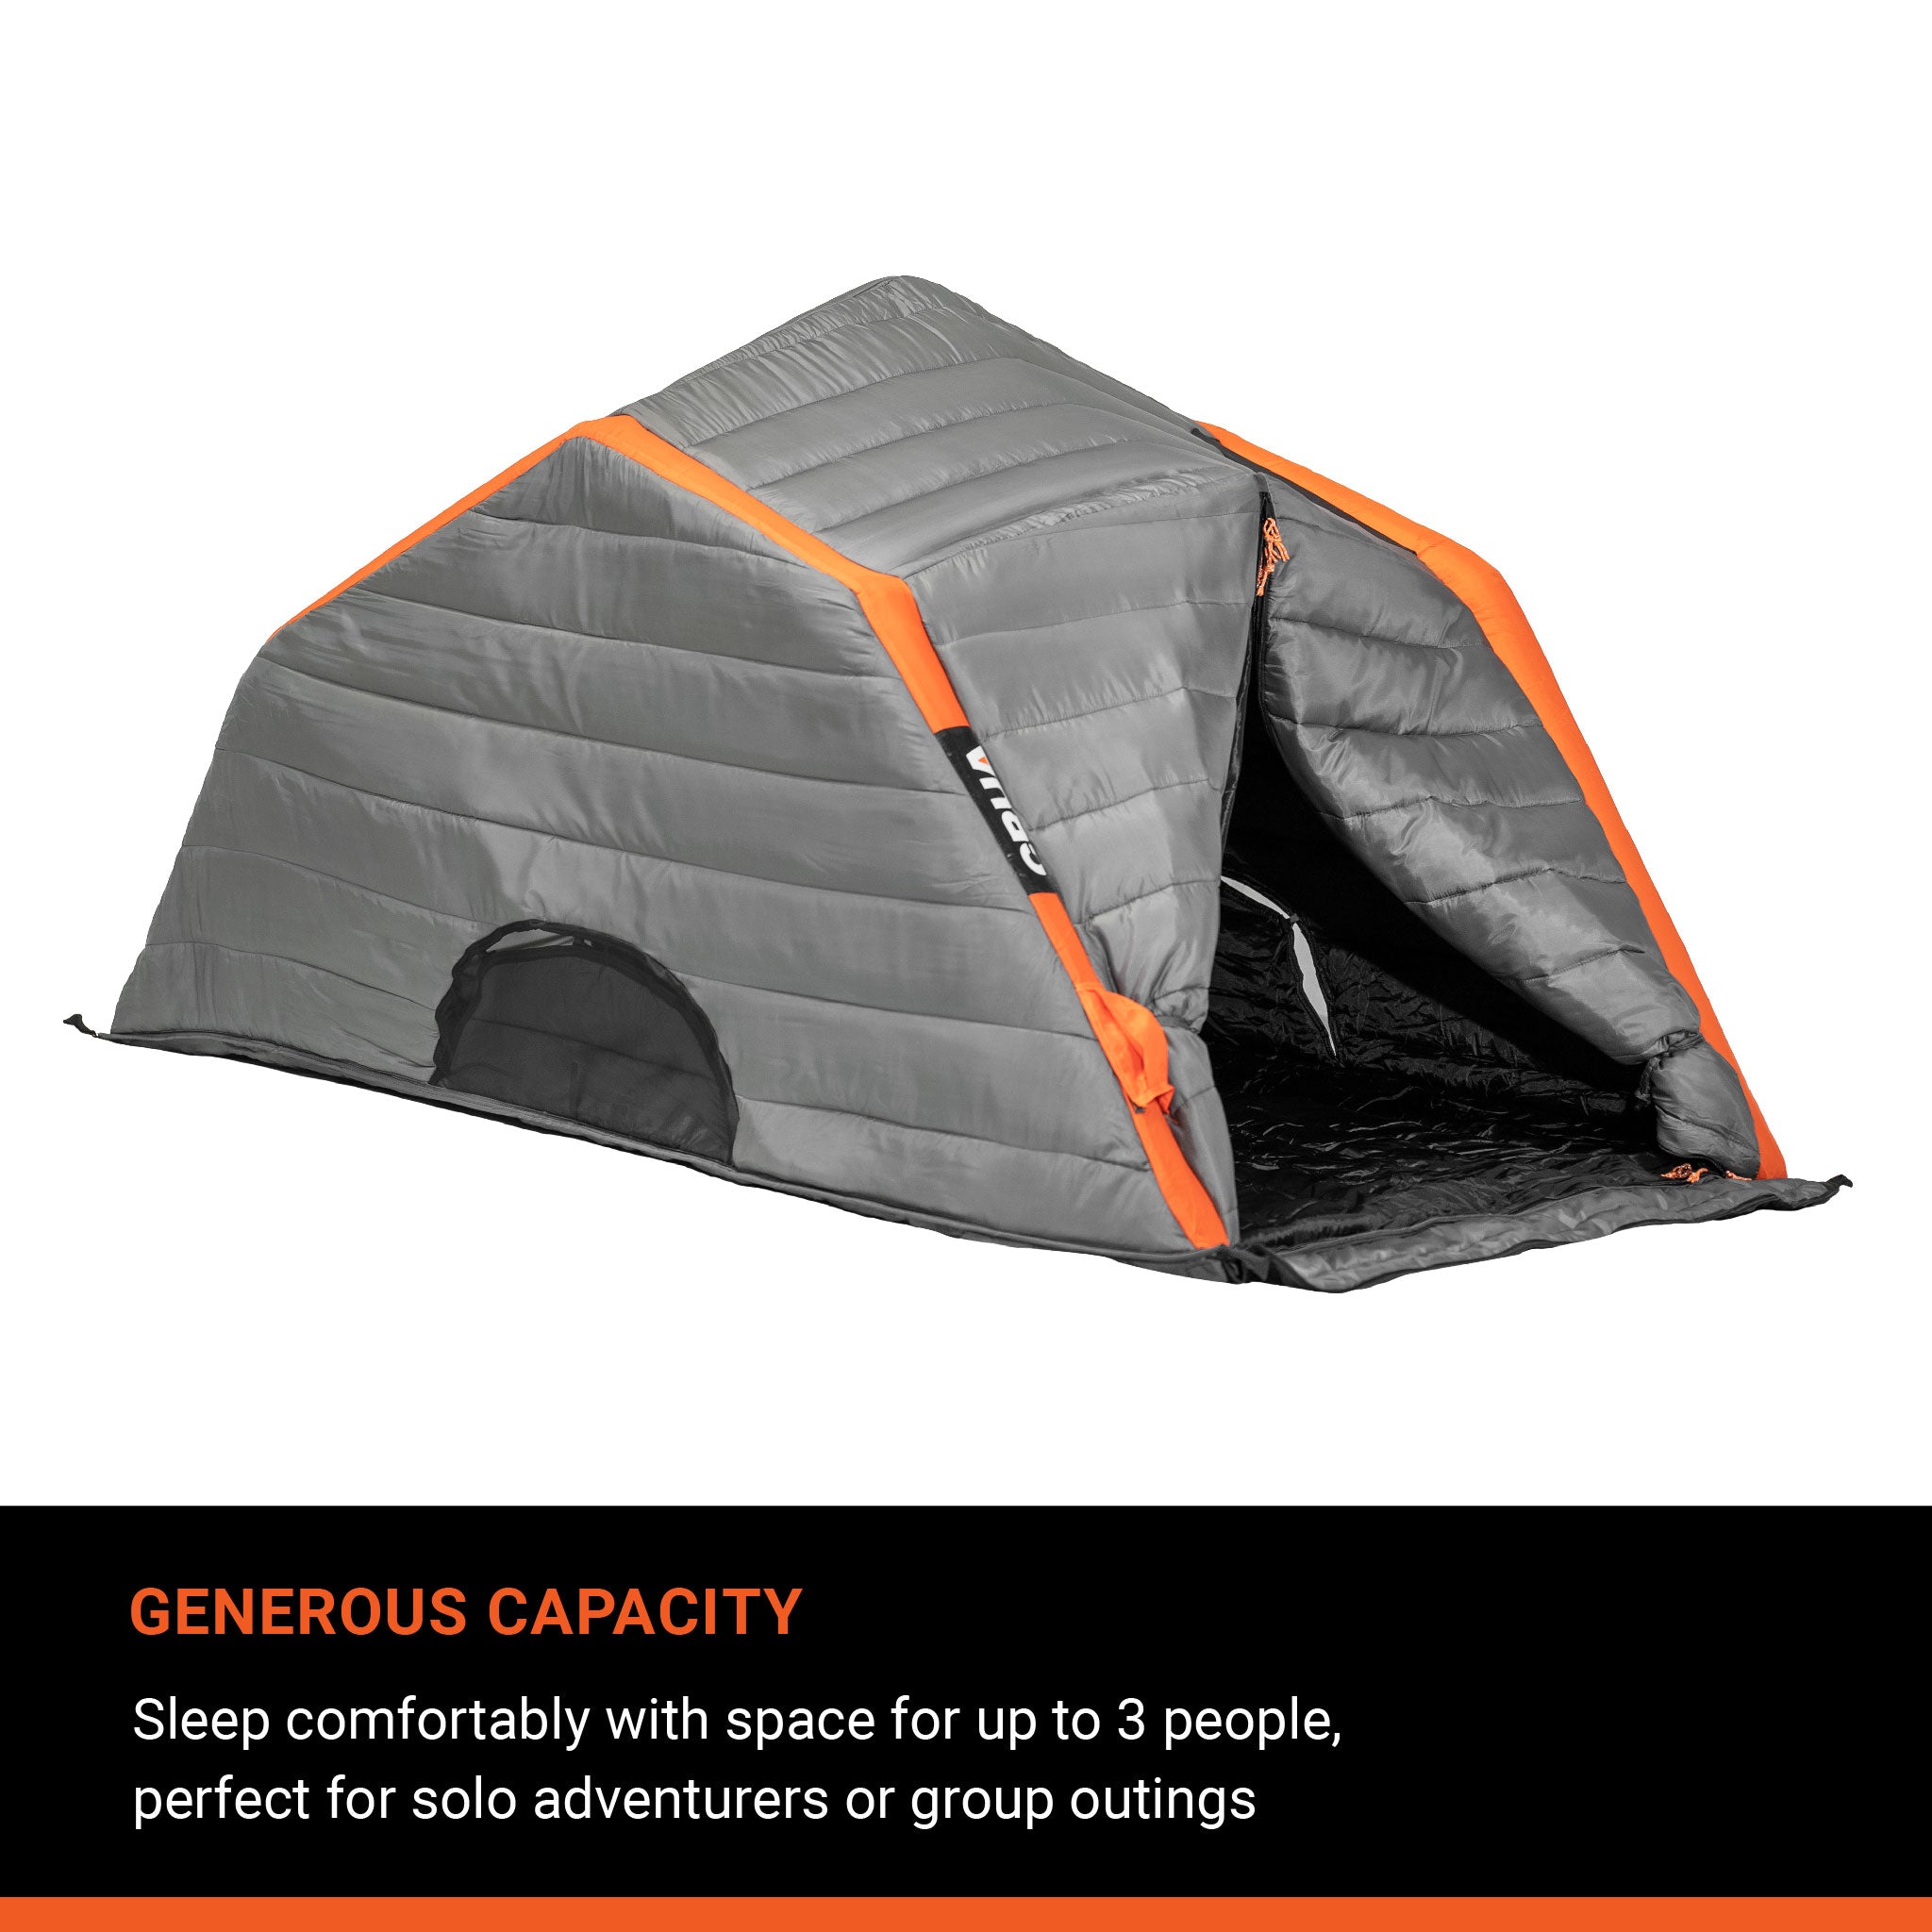 CULLA HAUL MAXX | 3 PERSON INSULATED INNER TENT WITH TEMPERATURE REGULATING, NOISE DAMPENING AND LIGHT BLOCKING FEATURES